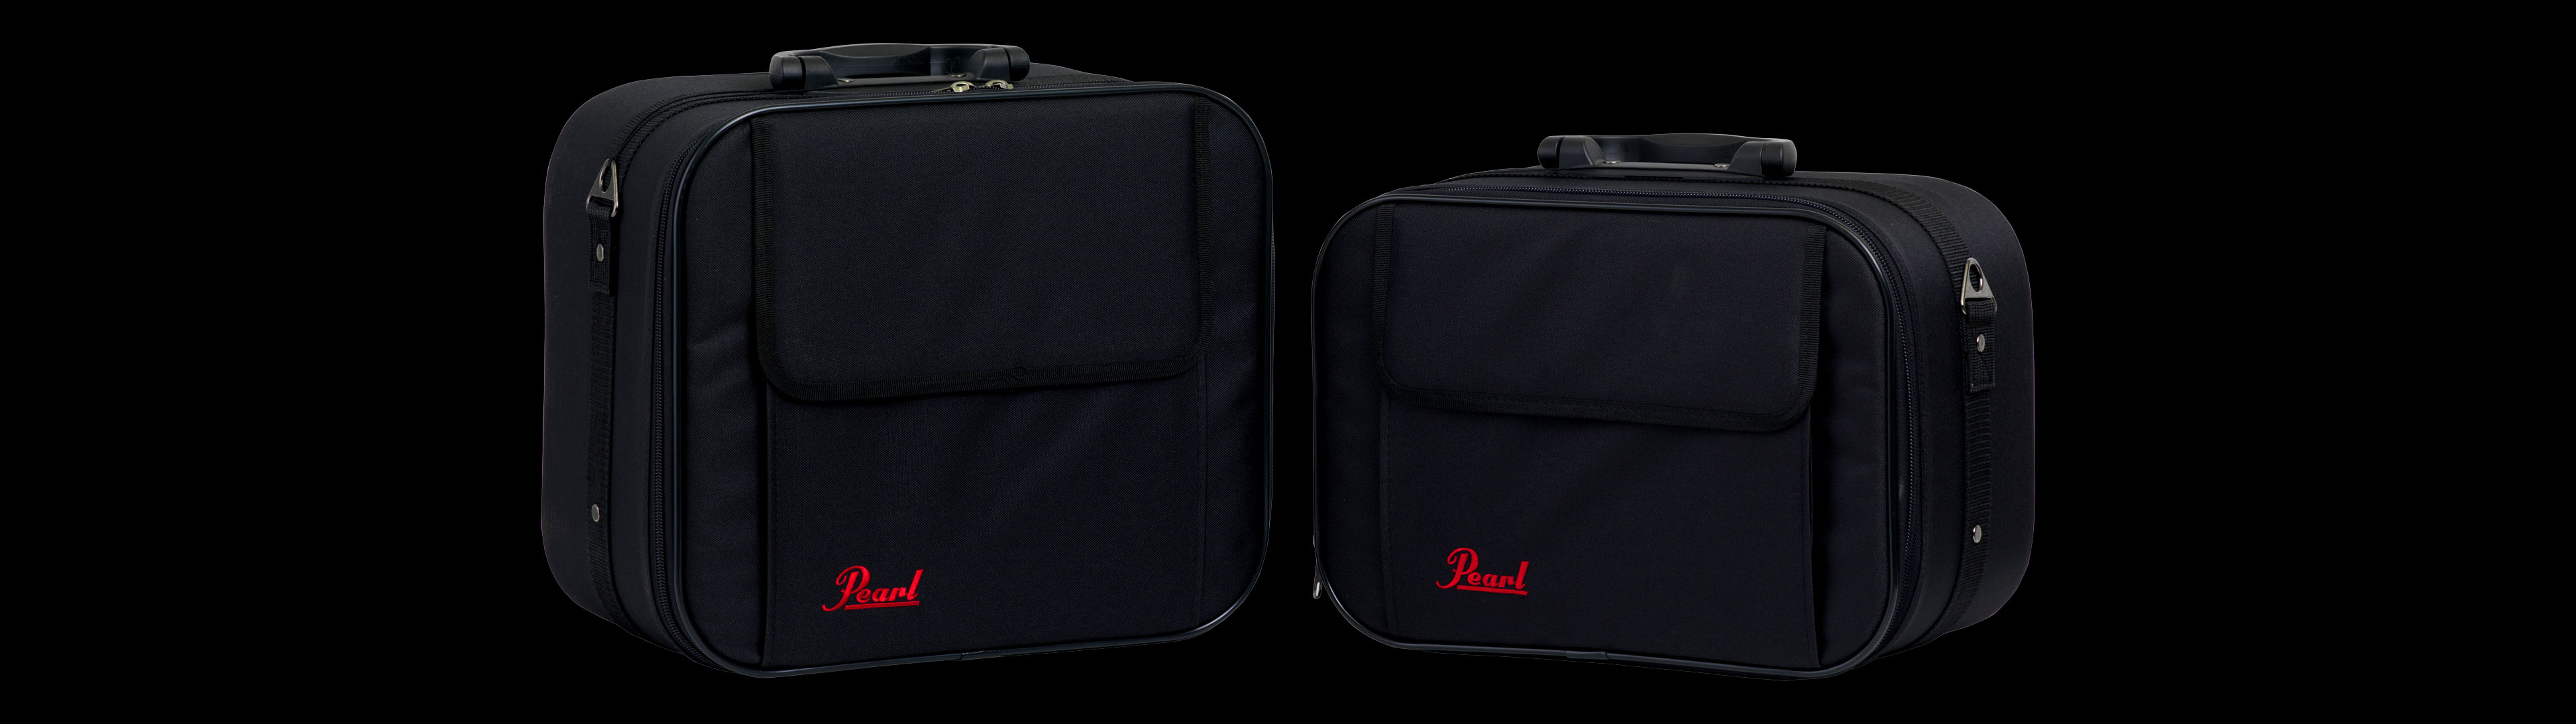 cases & bags